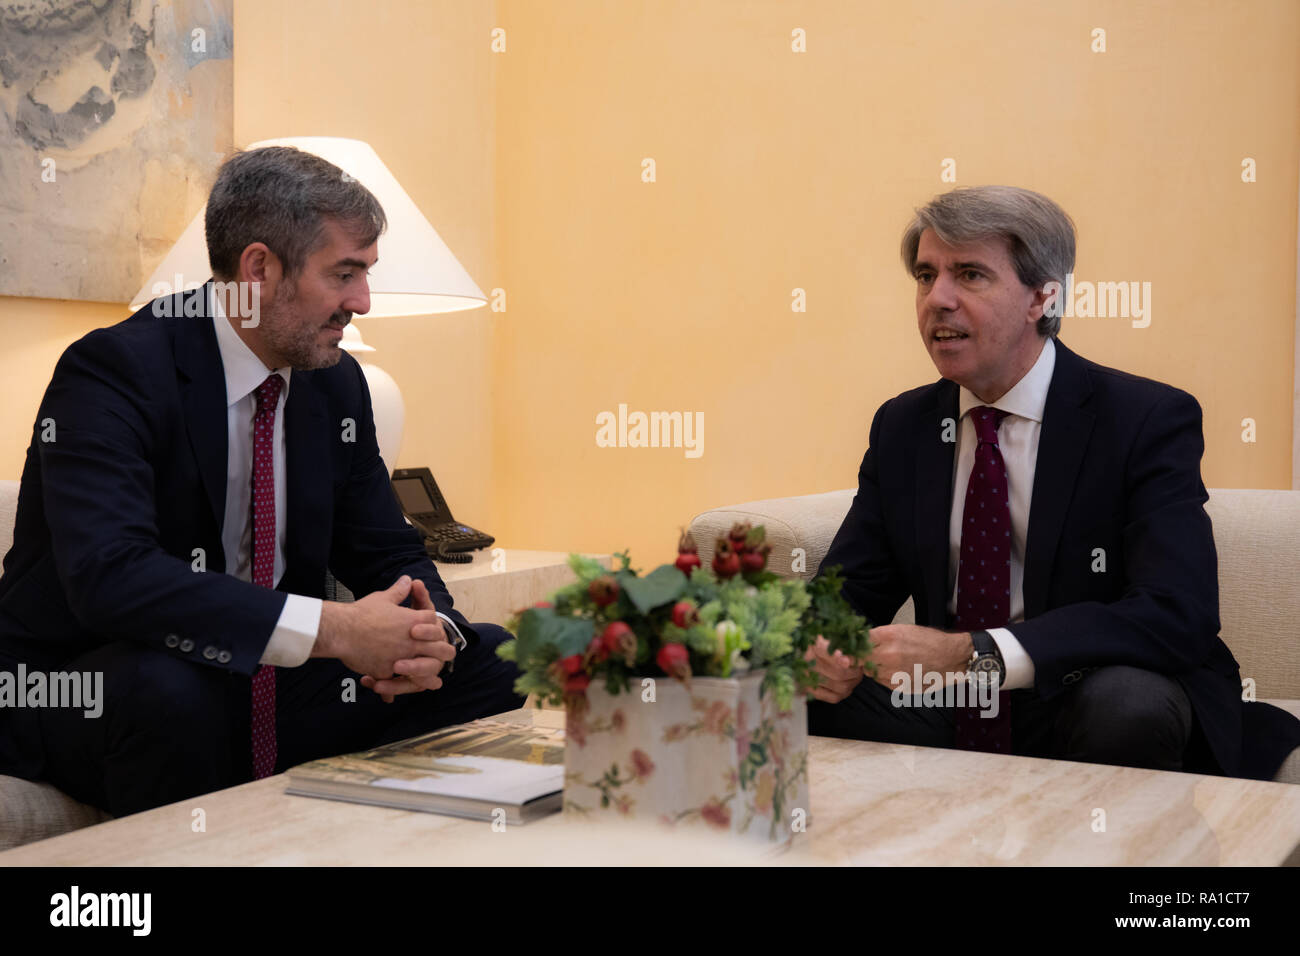 Madrid, Spain. 30th December 2018. FERNANDO CLAVIJO(left), The President of the Community of the Canary Islands and ANGEL GARRIDO, The President of the Community of Madrid. The president of the Community of Madrid, Ángel Garrido, has met with his Canarian counterpart, Fernando Clavijo, to review the latest preparations for the New Year bells, which tomorrow will offer the clock of Puerta del Sol and this year will sound also in the Canary spindle on Dec 30, 2018 in Madrid, Spain Credit: Jesús Hellin/Alamy Live News Stock Photo